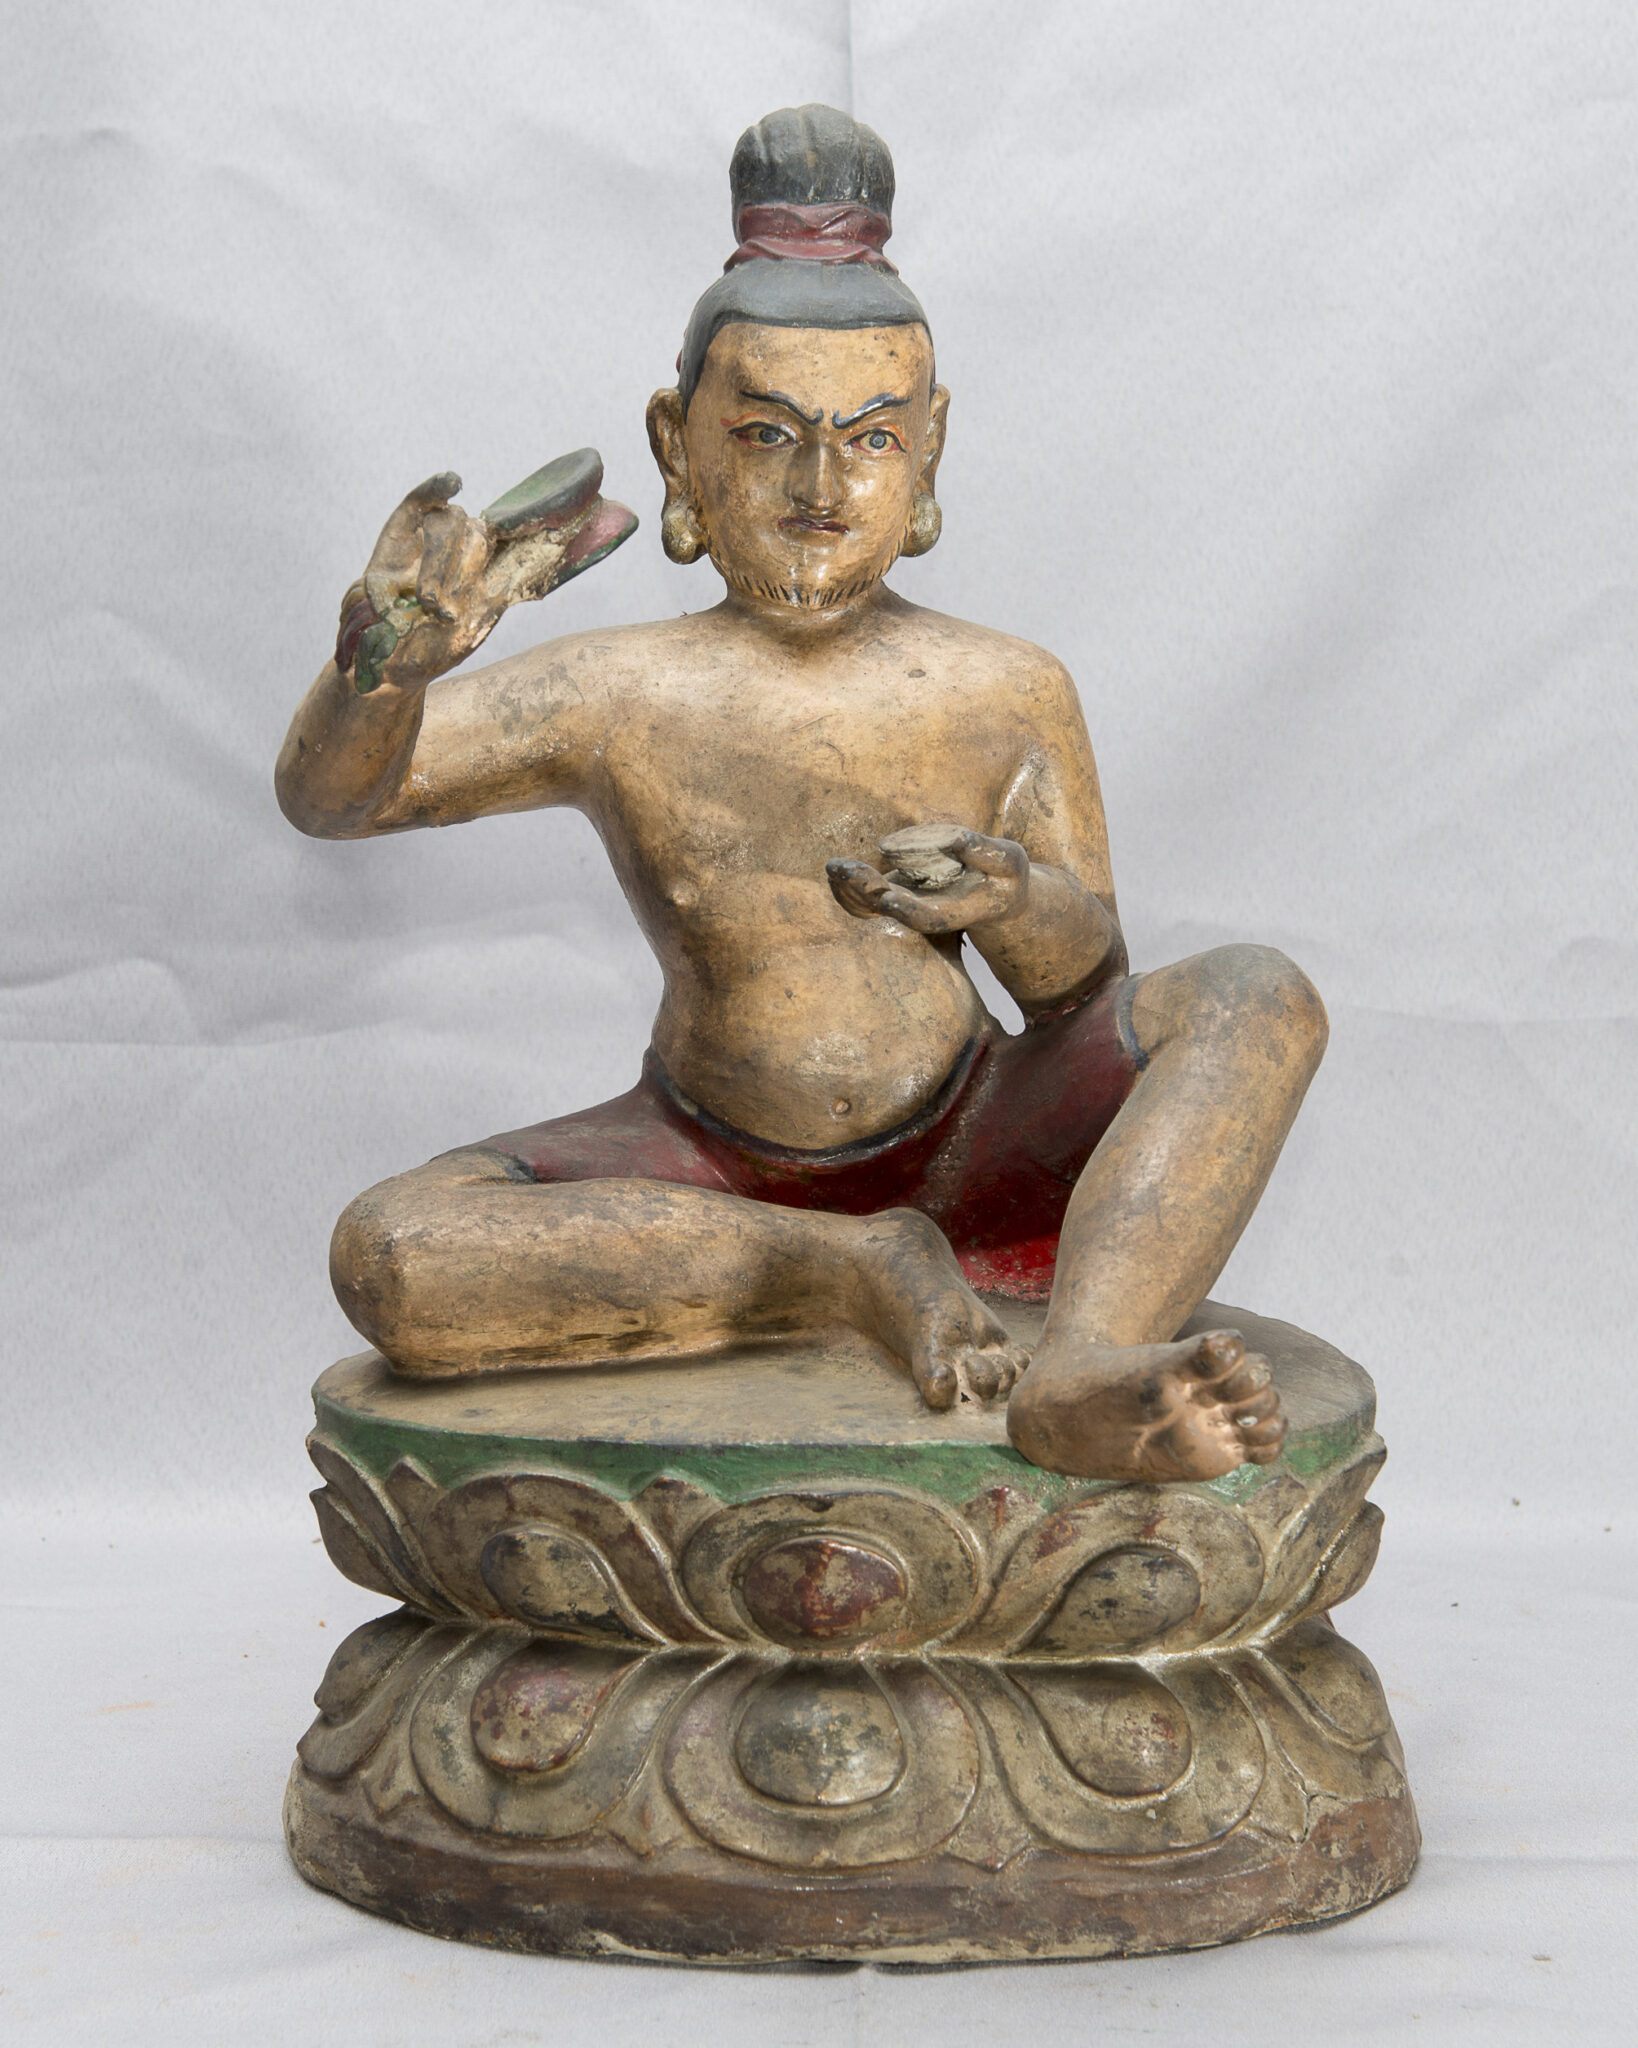 Sculpture depicting Siddha with topknot seated on lotus pedestal holding drum in raised left hand